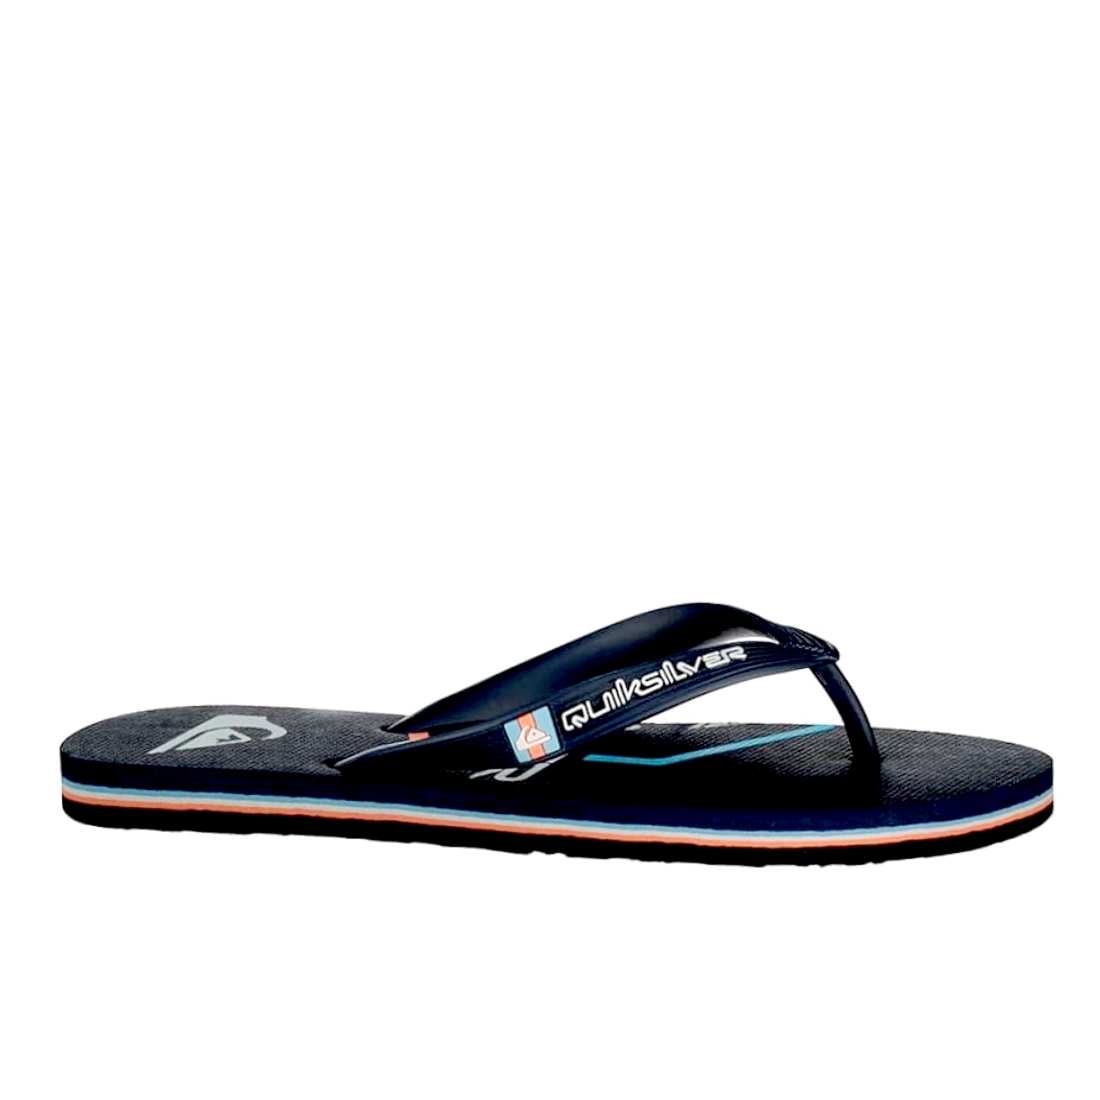 Tong Homme Quiksilver  aqyL101278 Navy byj4